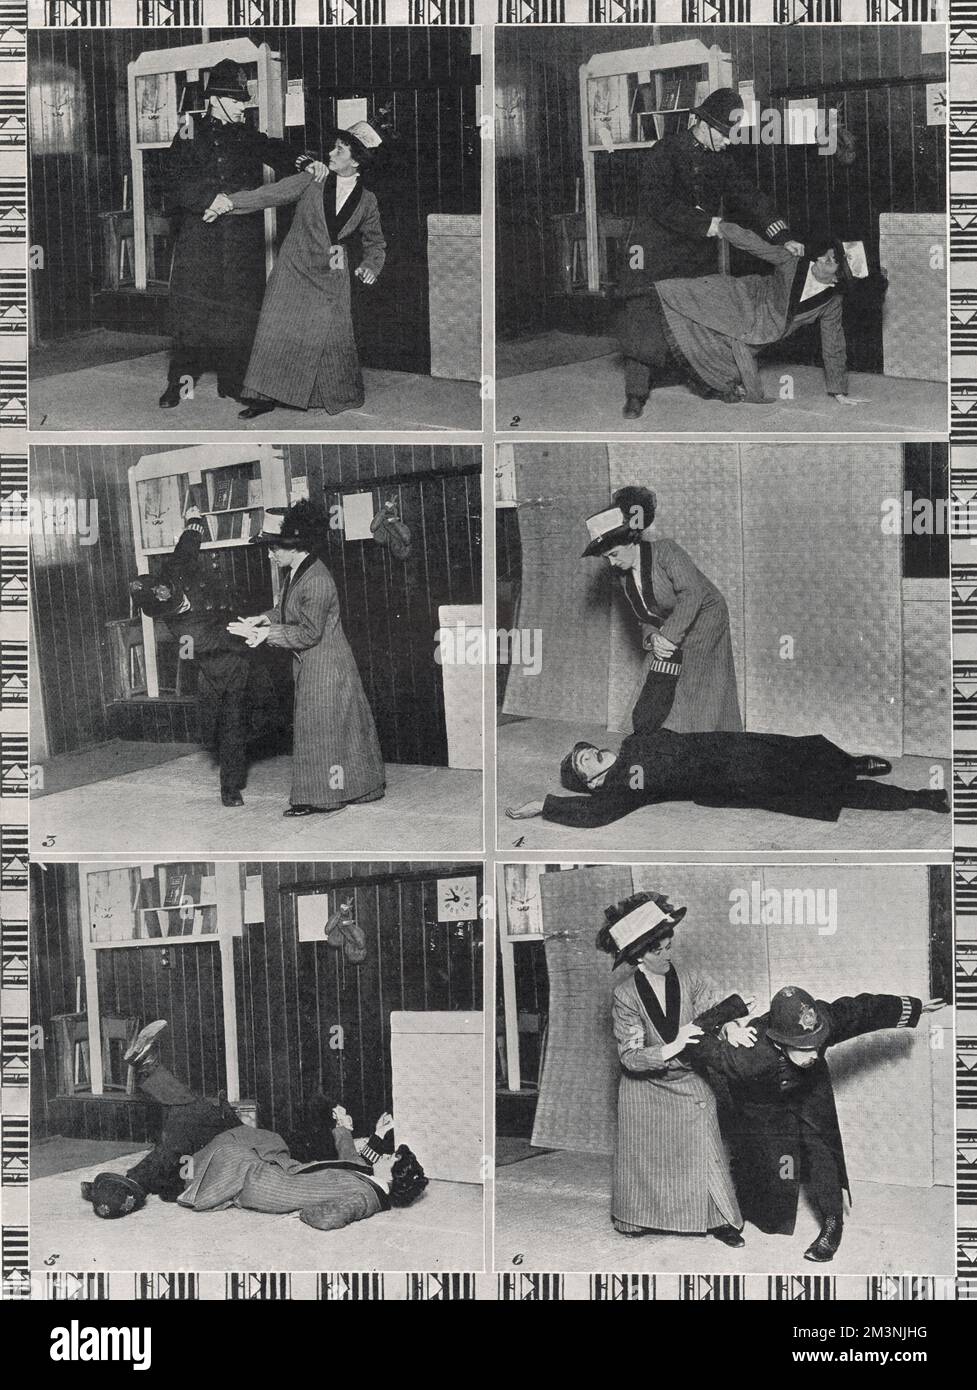 If you want to earn some time throw a policeman! The Ju-Jitsu suffragette shows how a policeman may be tackled. Mrs Garrud, the well-known suffragette, who is only four foot ten but skilled in the art of Japanese wrestling, disposes of a policeman.  1. the policeman attempts to arrest the suffragette  2. and the suffragette promptly forms the scissors  3. a hand-lock from a punch  4. the policeman is kept down by an arm-lock across the knee  5. the policeman is thrown, after the scissors  6. putting a lock on the policeman     Date: 1910 Stock Photo